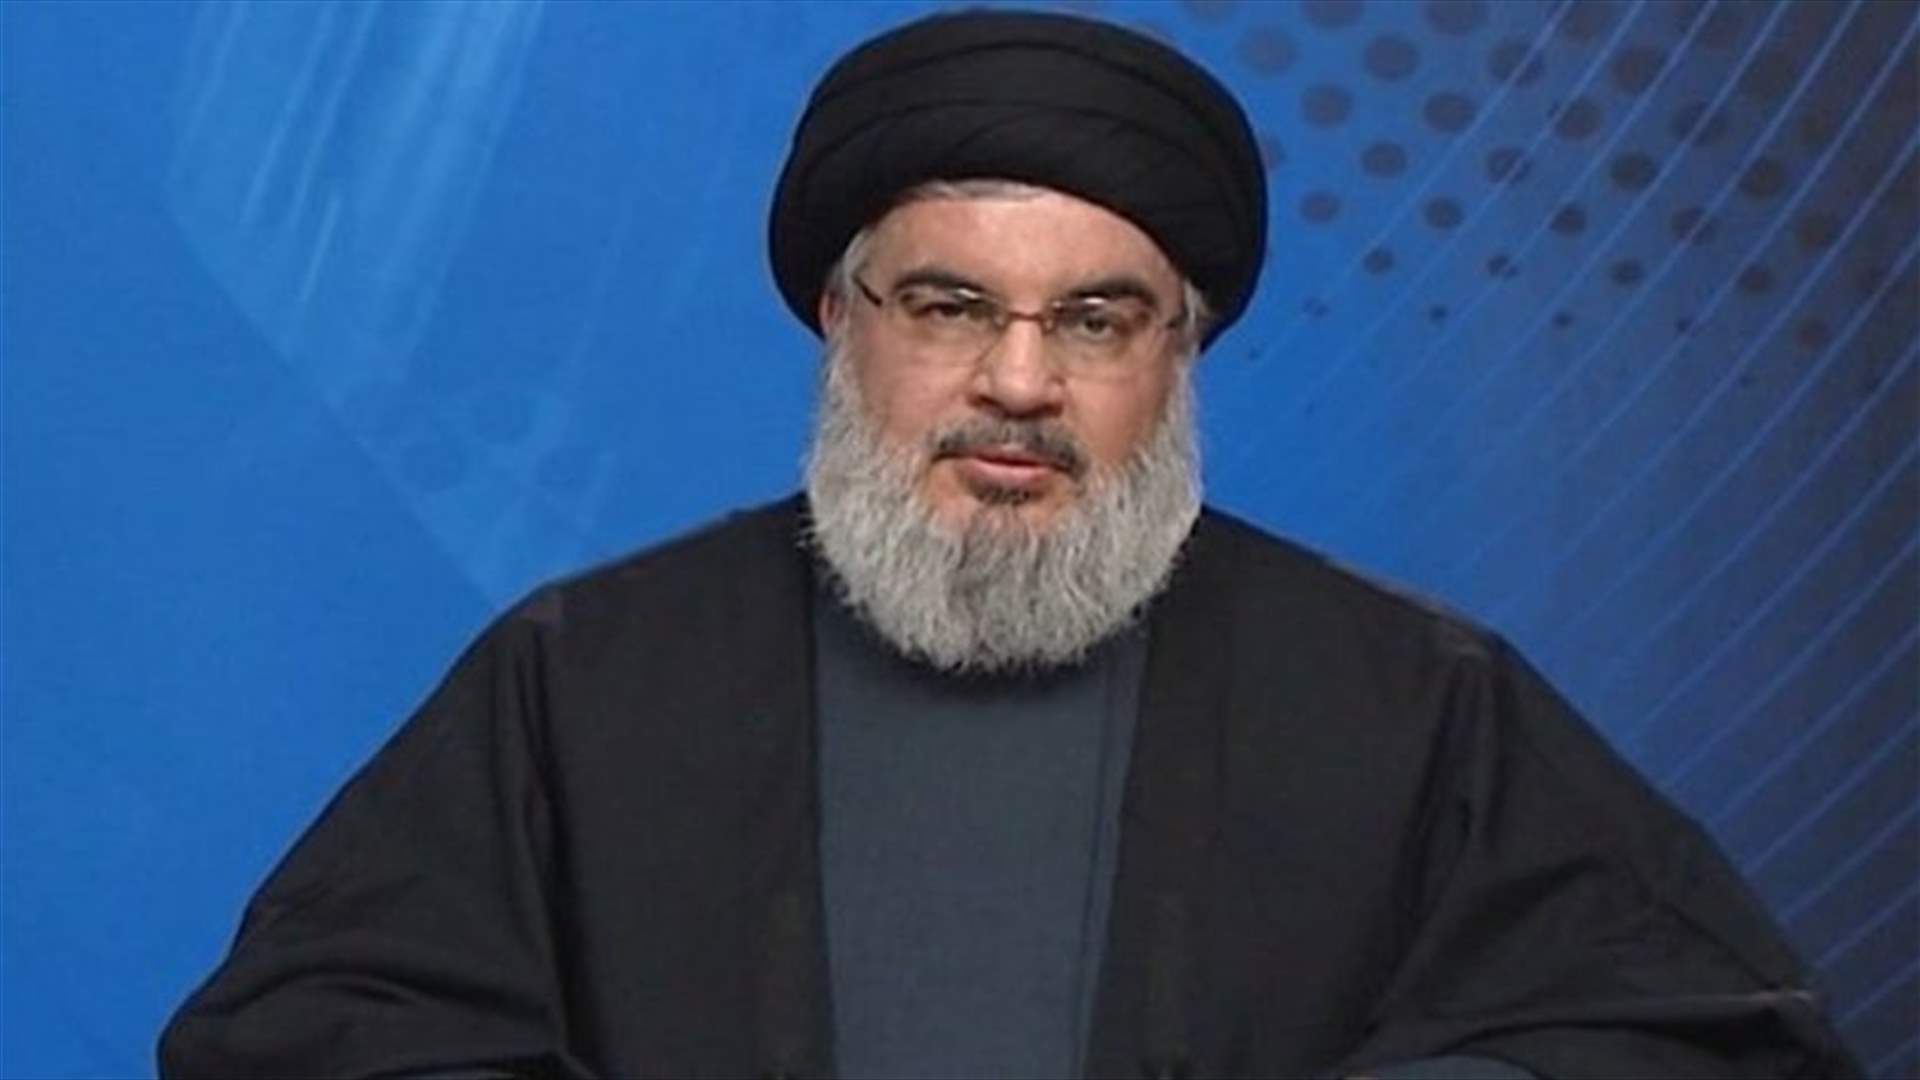 Nasrallah to deliver a televised speech on Wednesday